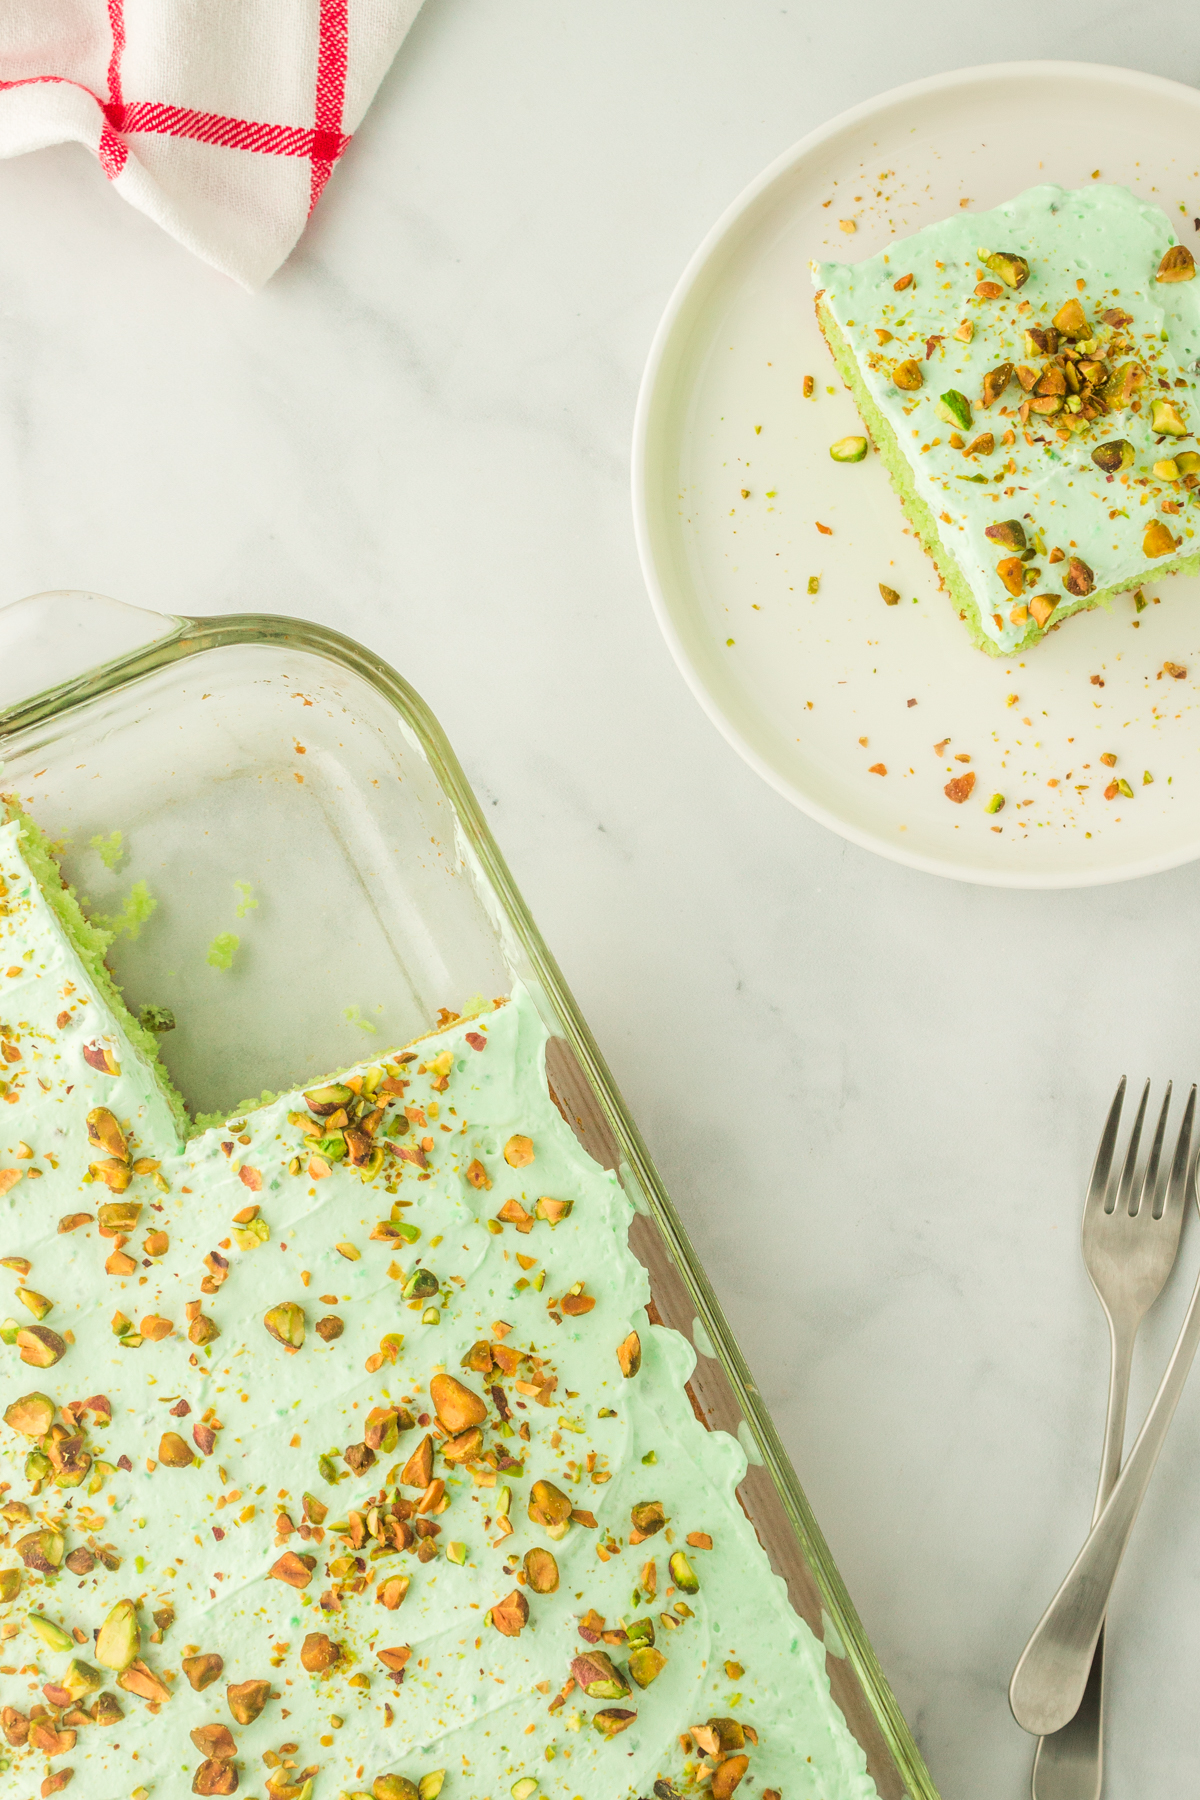 slice of pistachio cake made with a few simple ingredients